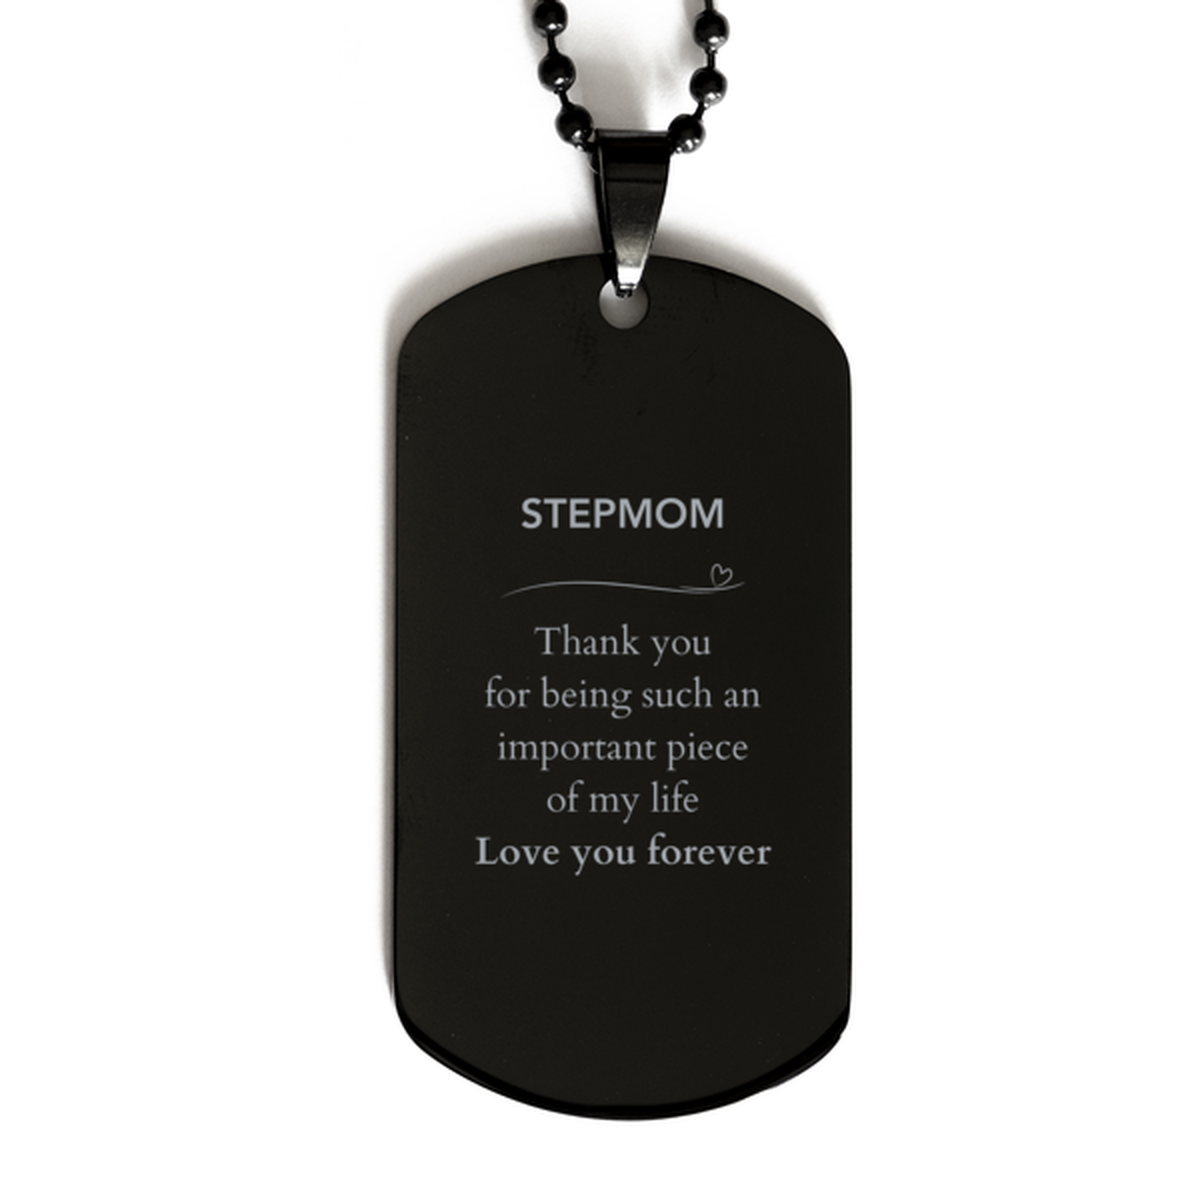 Appropriate Stepmom Black Dog Tag Epic Birthday Gifts for Stepmom Thank you for being such an important piece of my life Stepmom Christmas Mothers Fathers Day